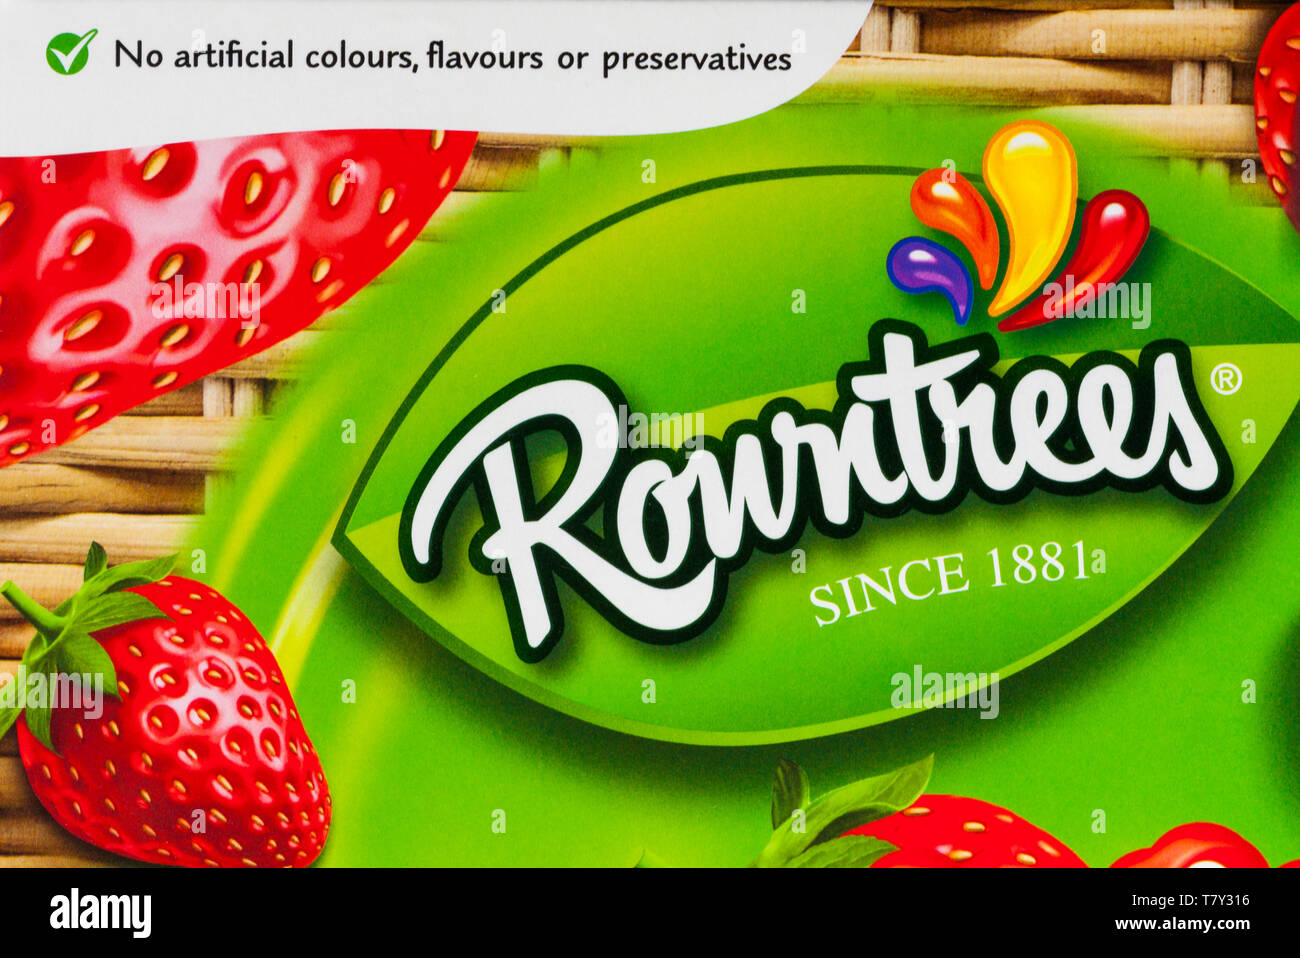 No artificial colours, flavours or preservatives detail with Rowntrees logo on box of Rowntrees Strawberry ice lollies Stock Photo